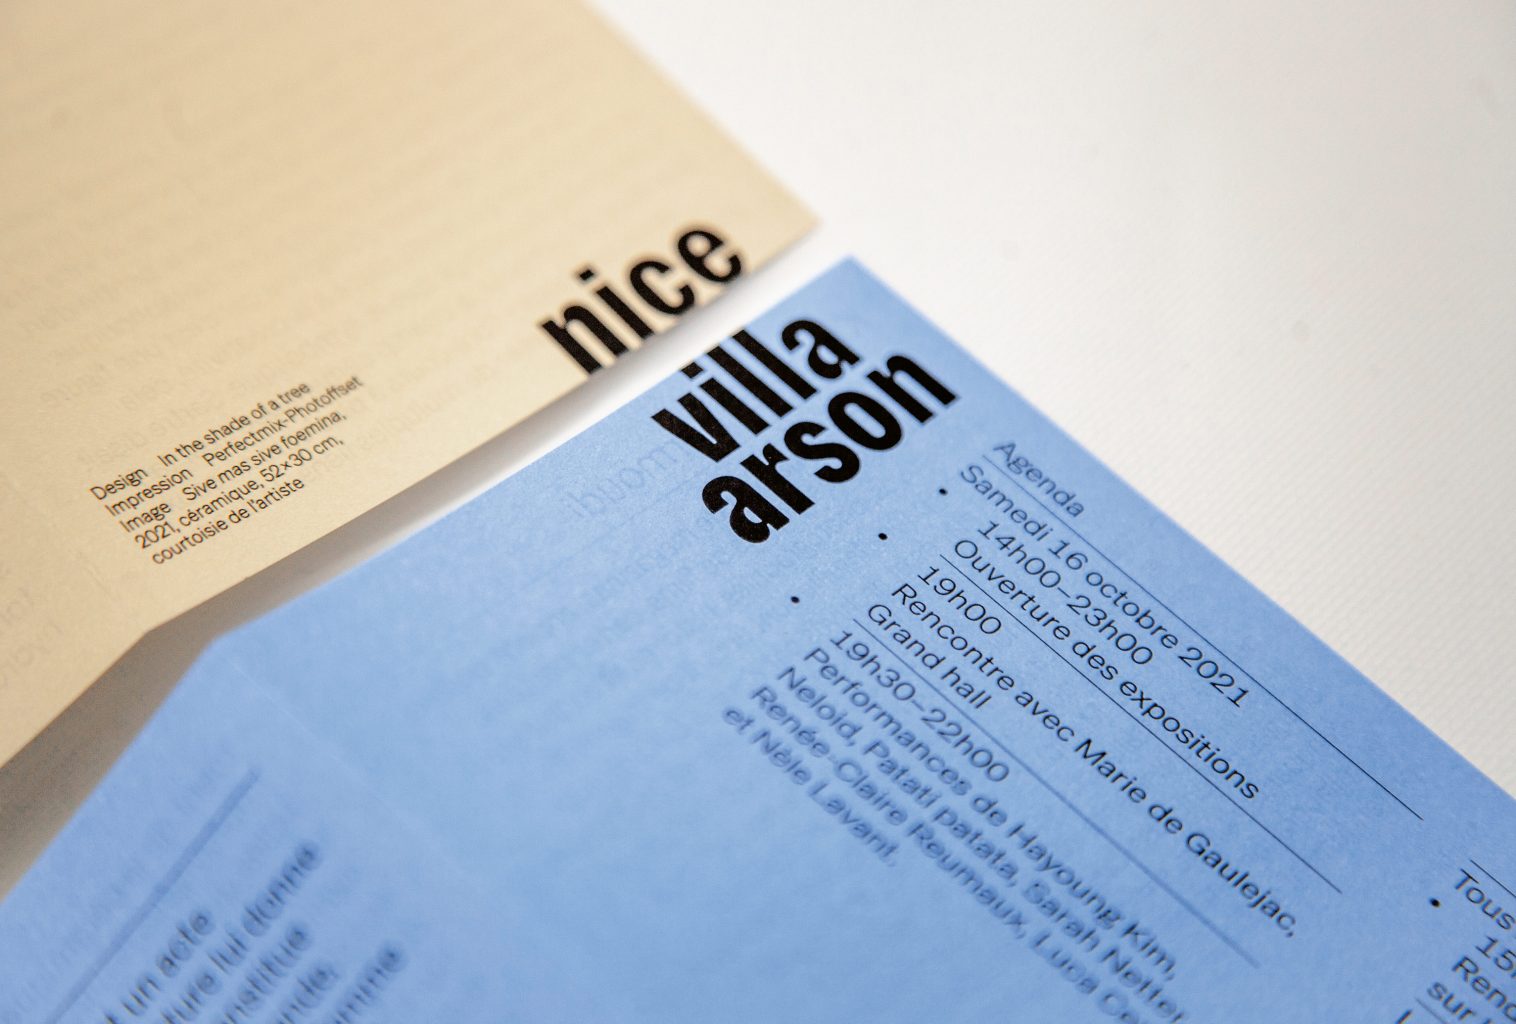 Visual identity for the Villa Arson Nice, an art school and art center in South of France, designed by In the shade of a tree studio, founded by Sophie Demay and Maël Fournier Comte